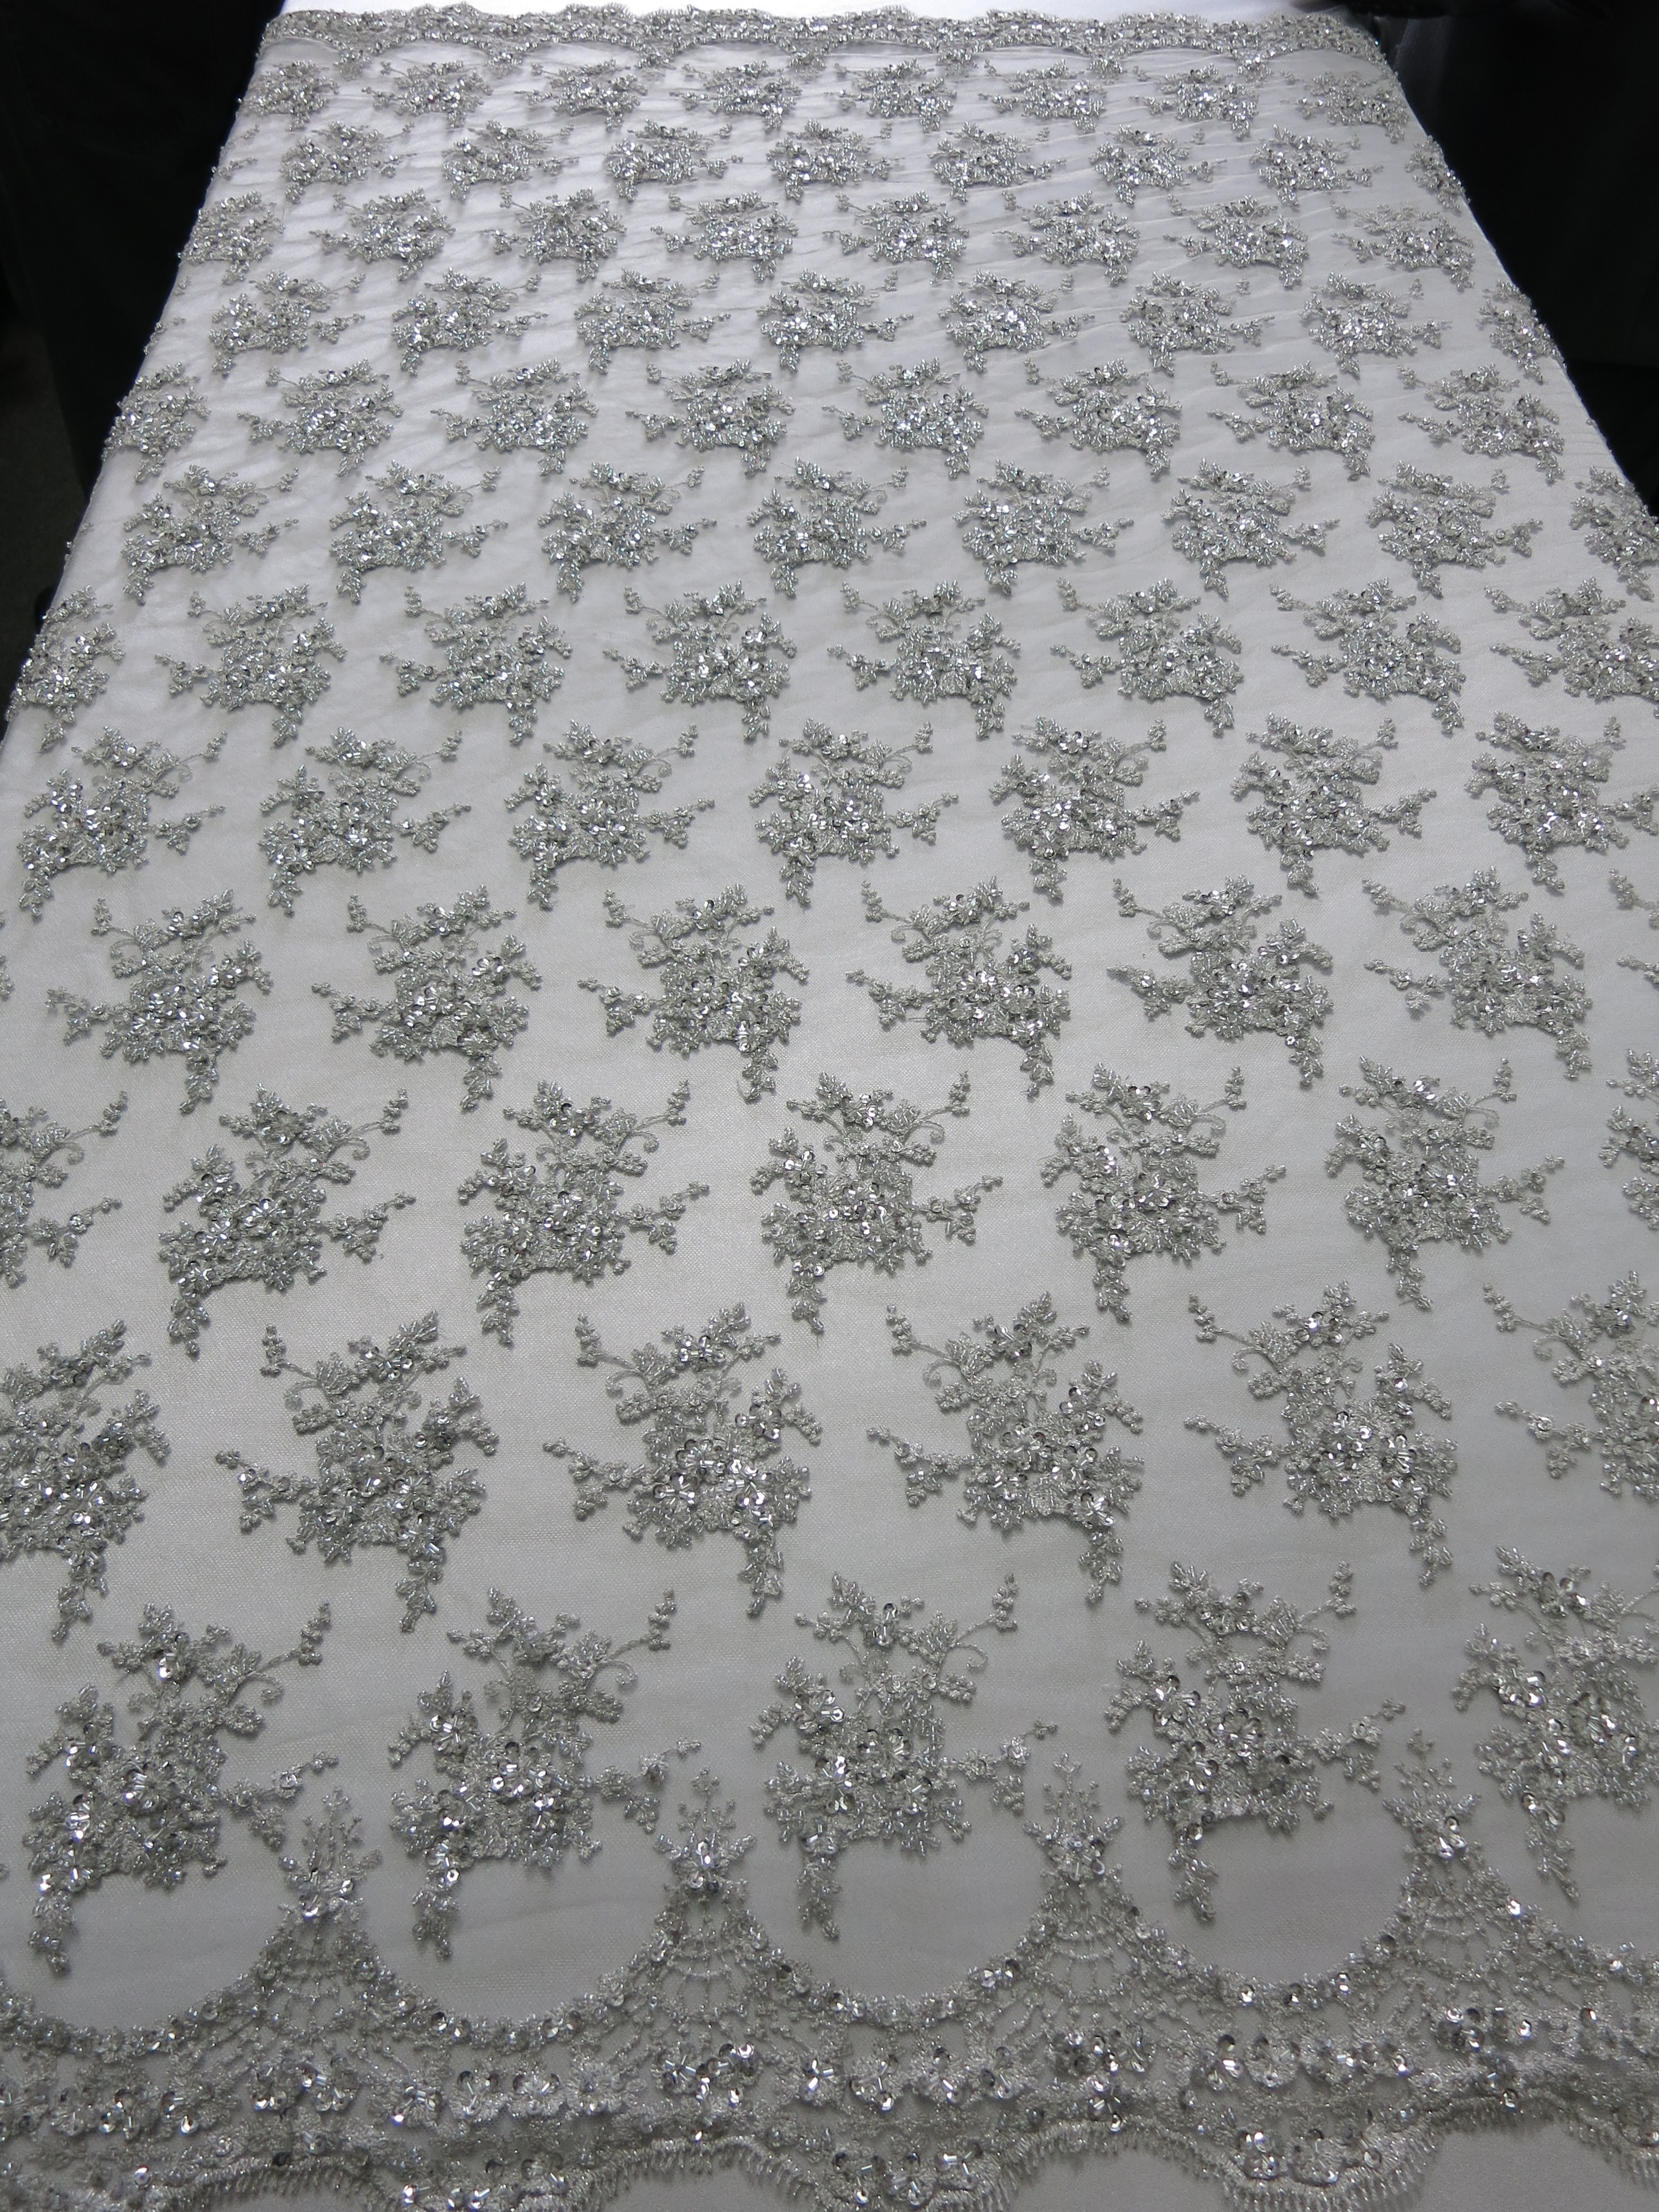 1 Meter Flower Embroidery Sequins Mesh Silver/White Lace Fabric Wide 54"